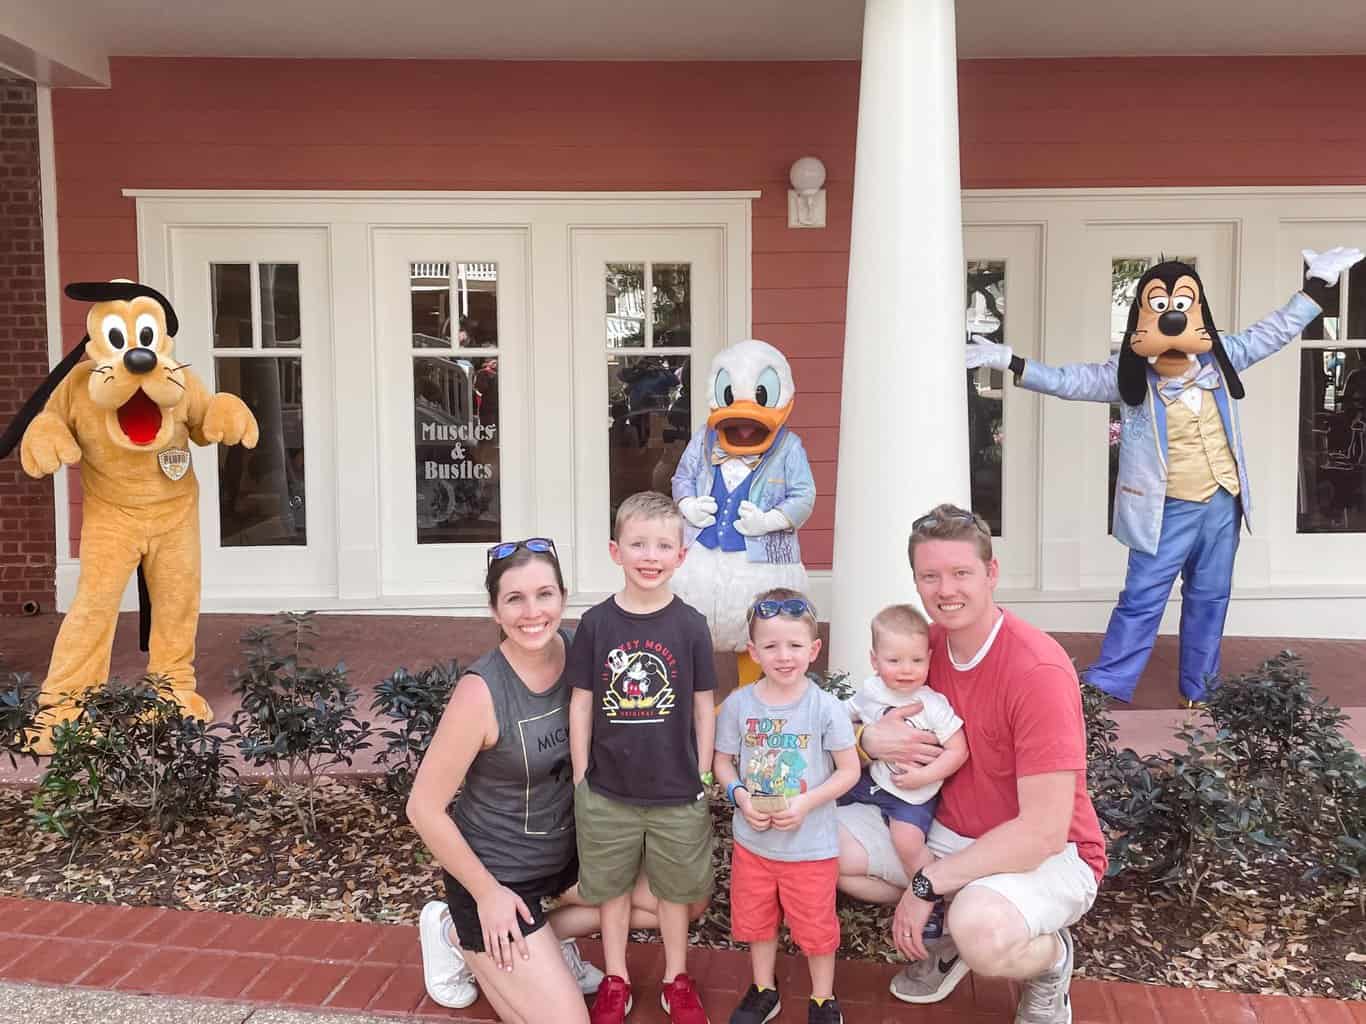 Family visiting with Disney characters at the BoardWalk at Disney World